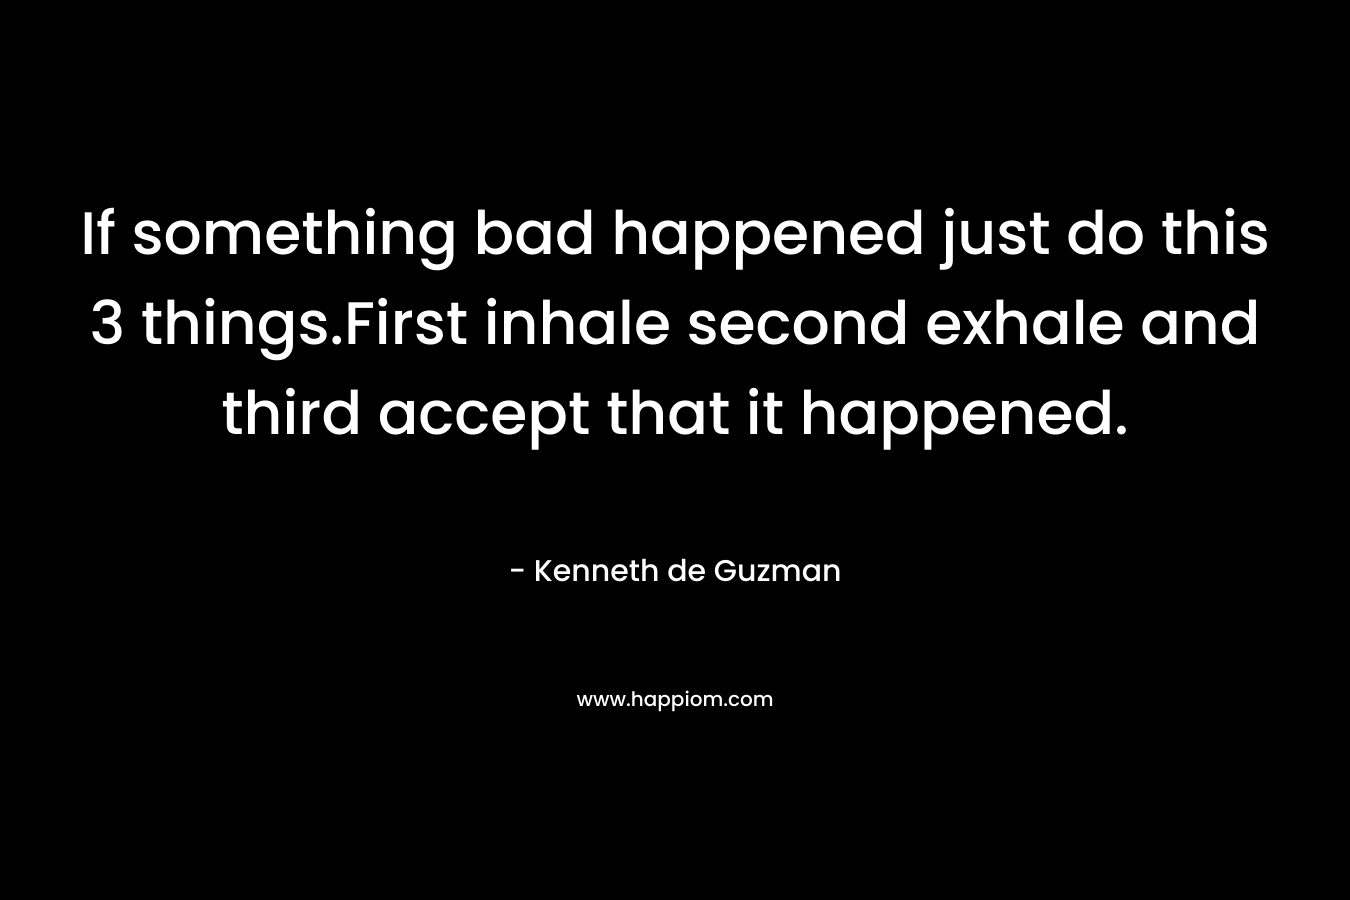 If something bad happened just do this 3 things.First inhale second exhale and third accept that it happened.